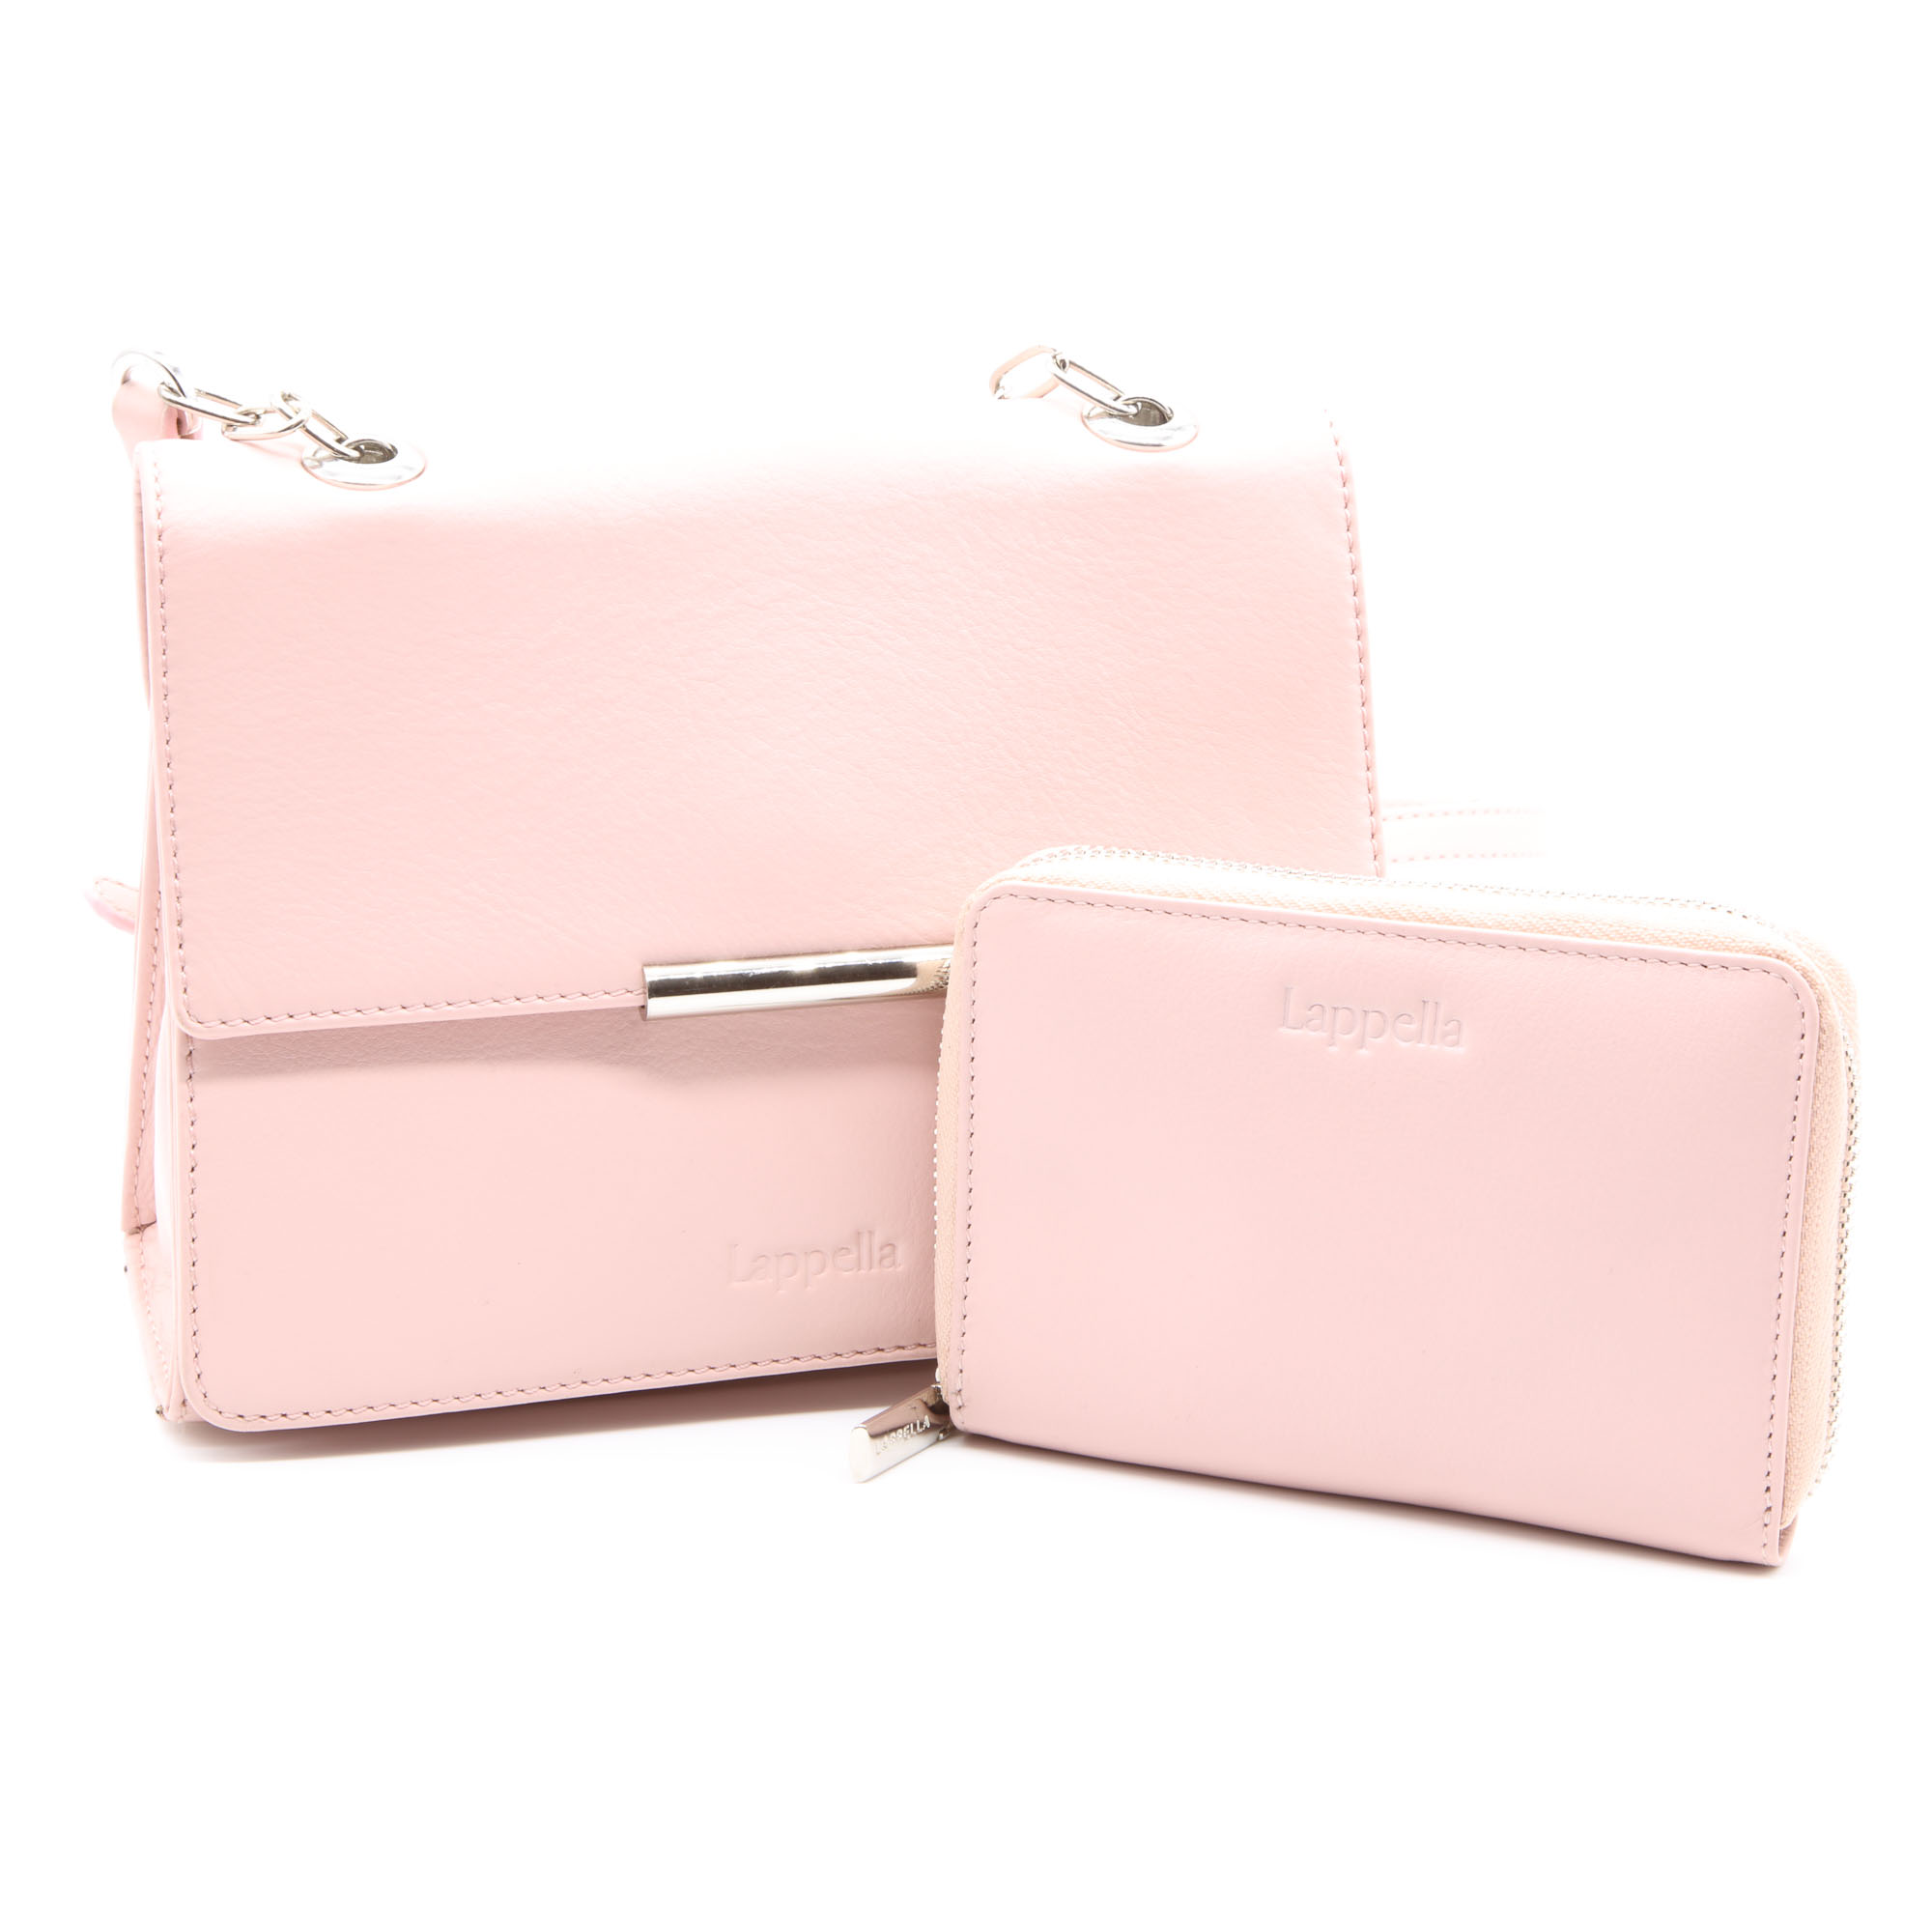 Pippie crossbody bag and Mia zip round purse in luxury soft blush pink leather.